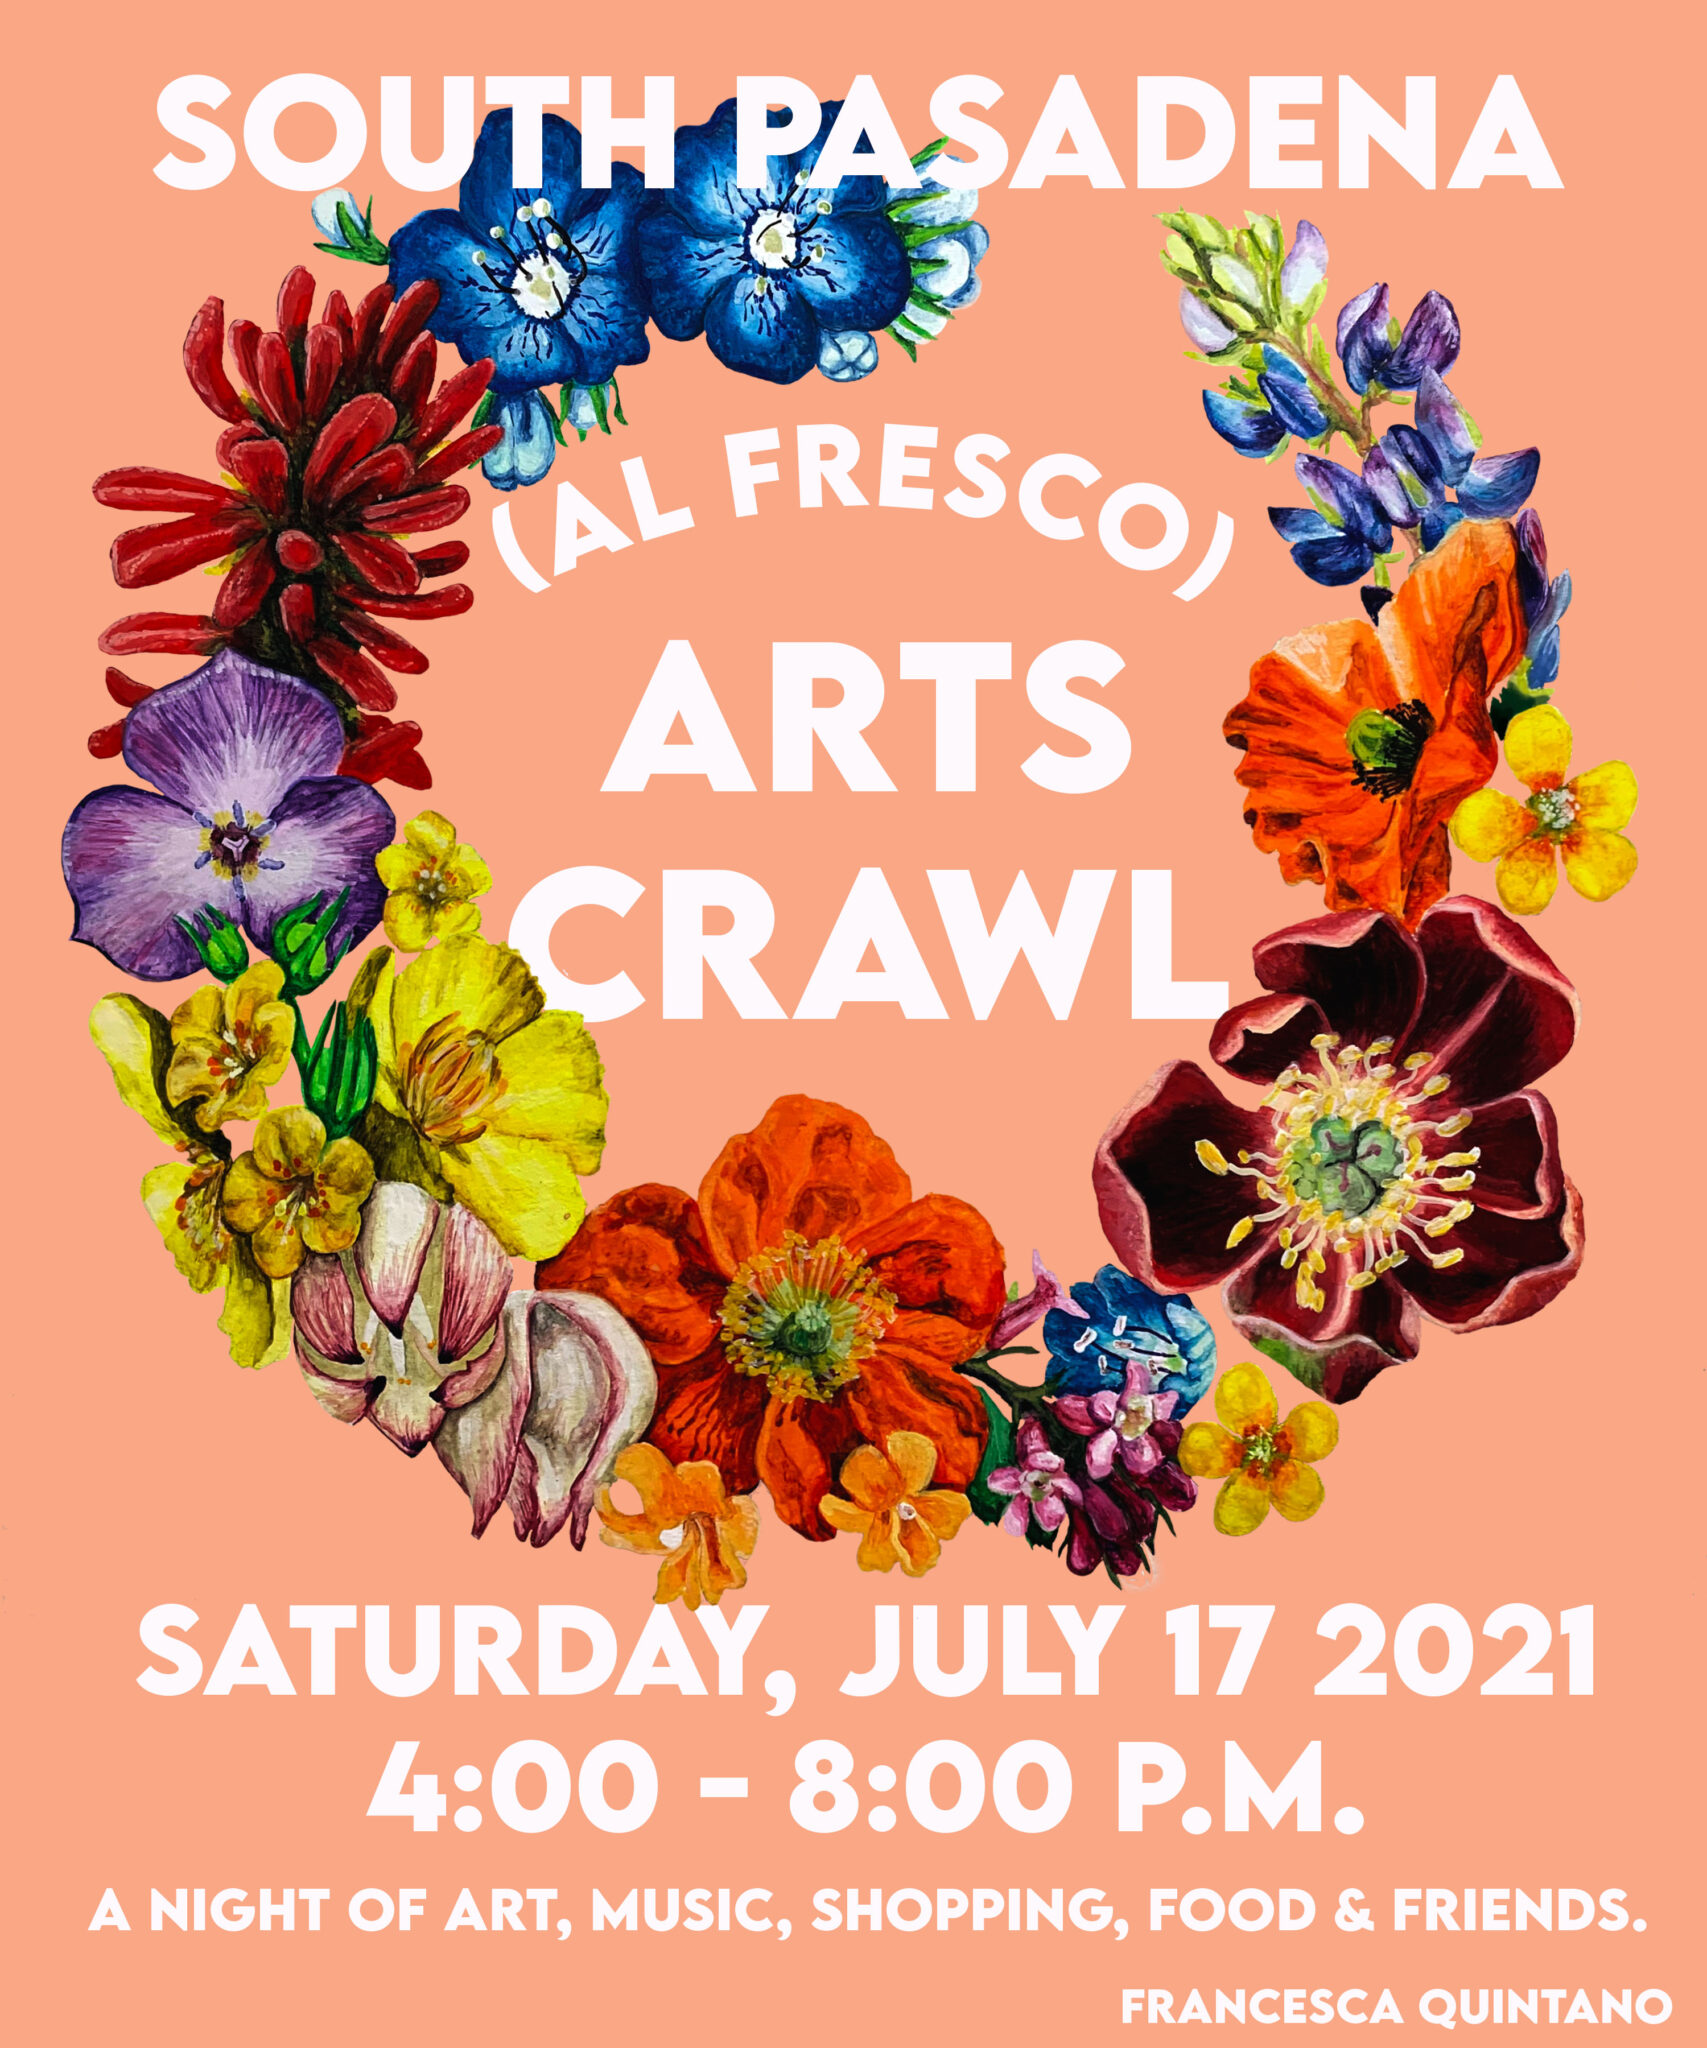 Thumbnail for Event preview: Guide to the 2021 Al Fresco Arts Crawl